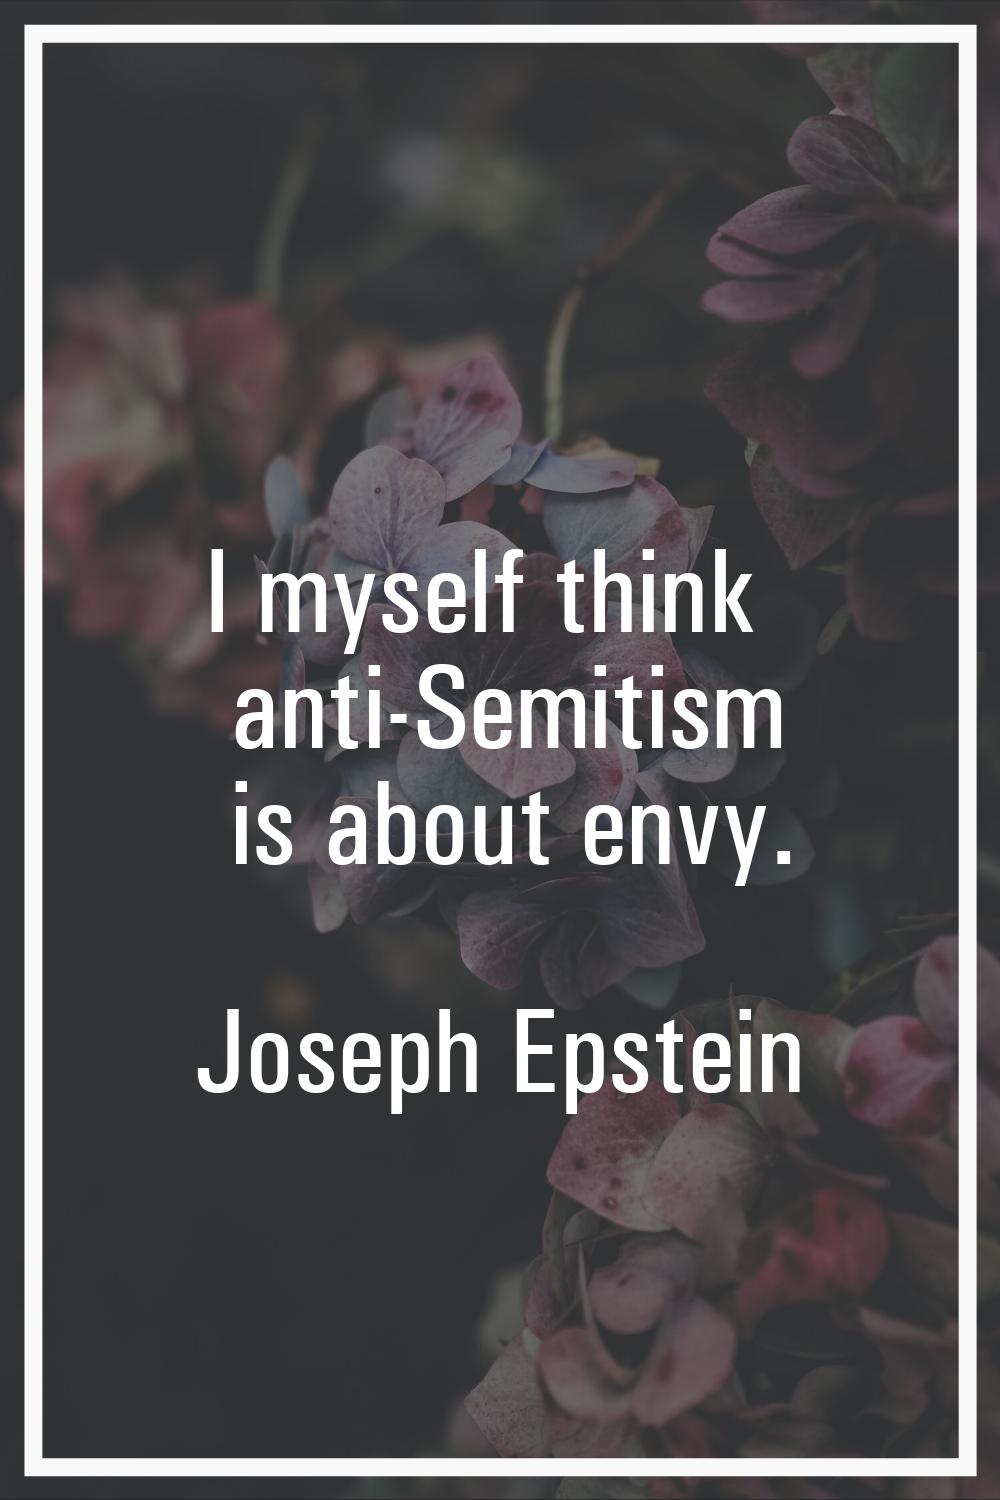 I myself think anti-Semitism is about envy.